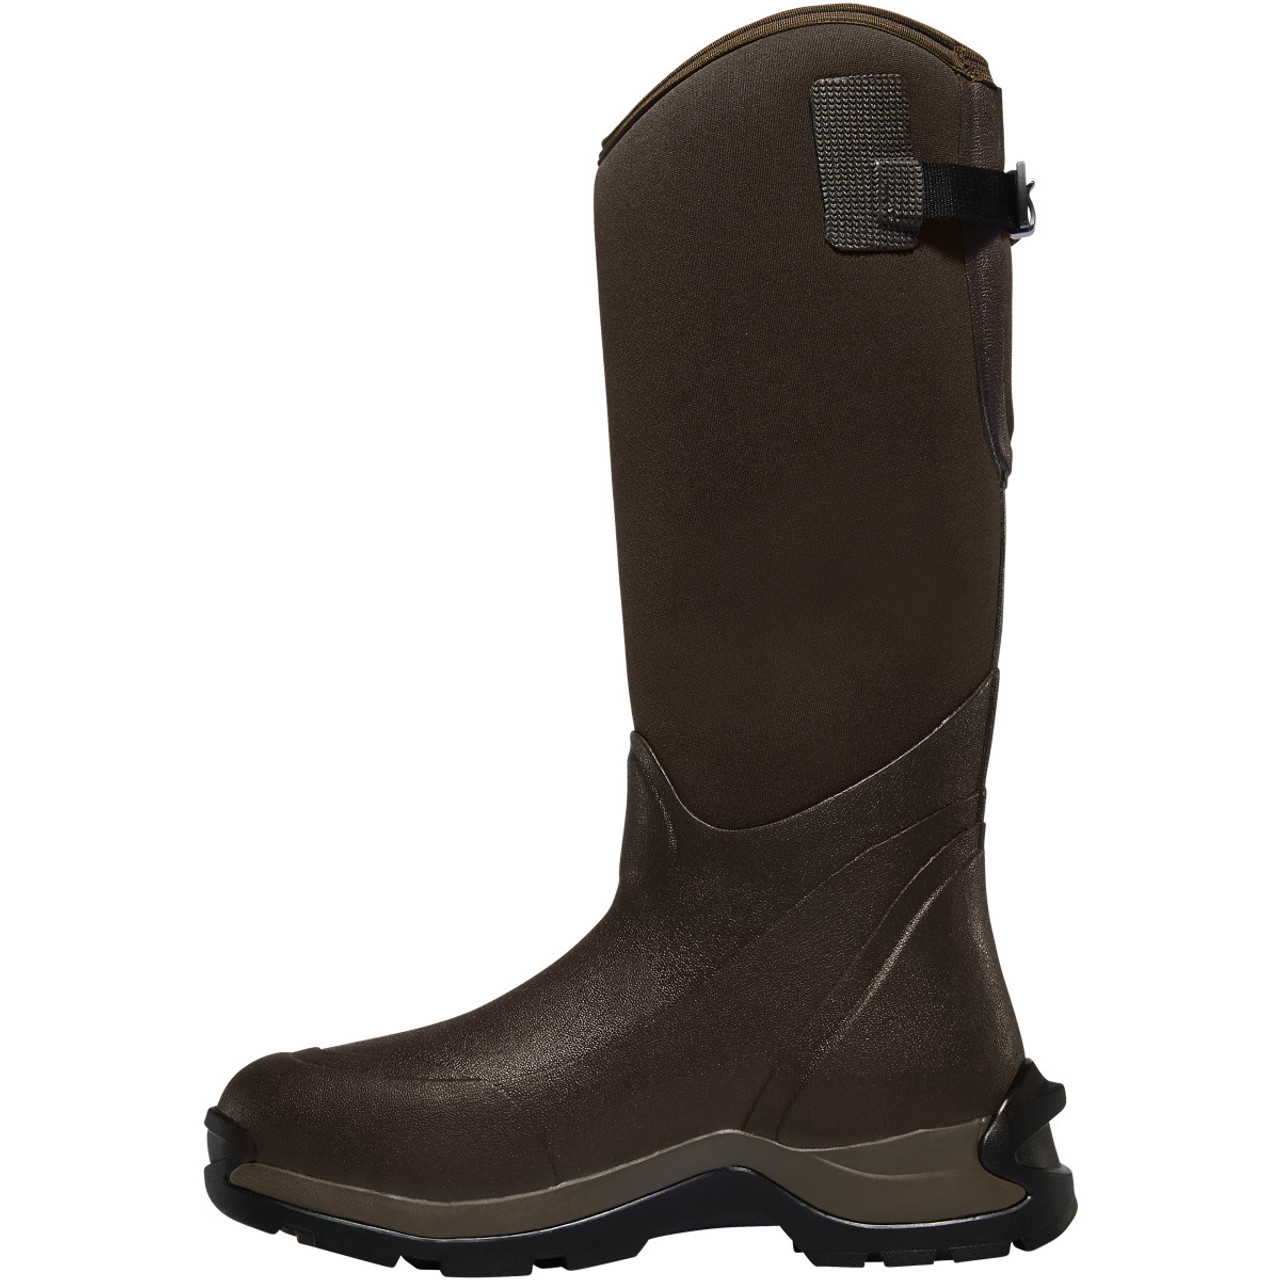 LACROSSE ALPHA THERMAL BROWN 7.0MM UTILITY BOOTS 644109